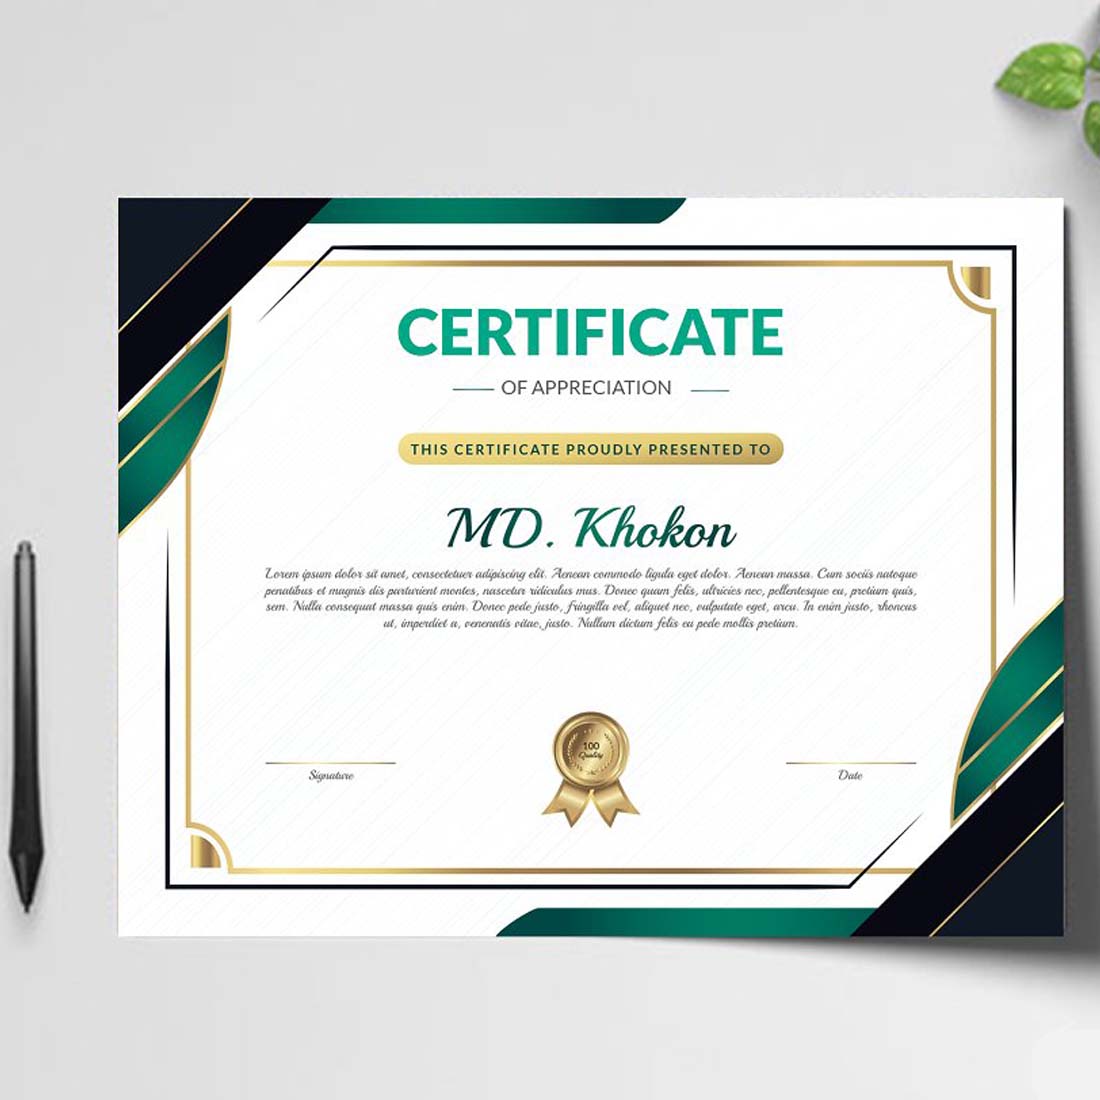 Abstract Certificate Template Design V-21 preview image.